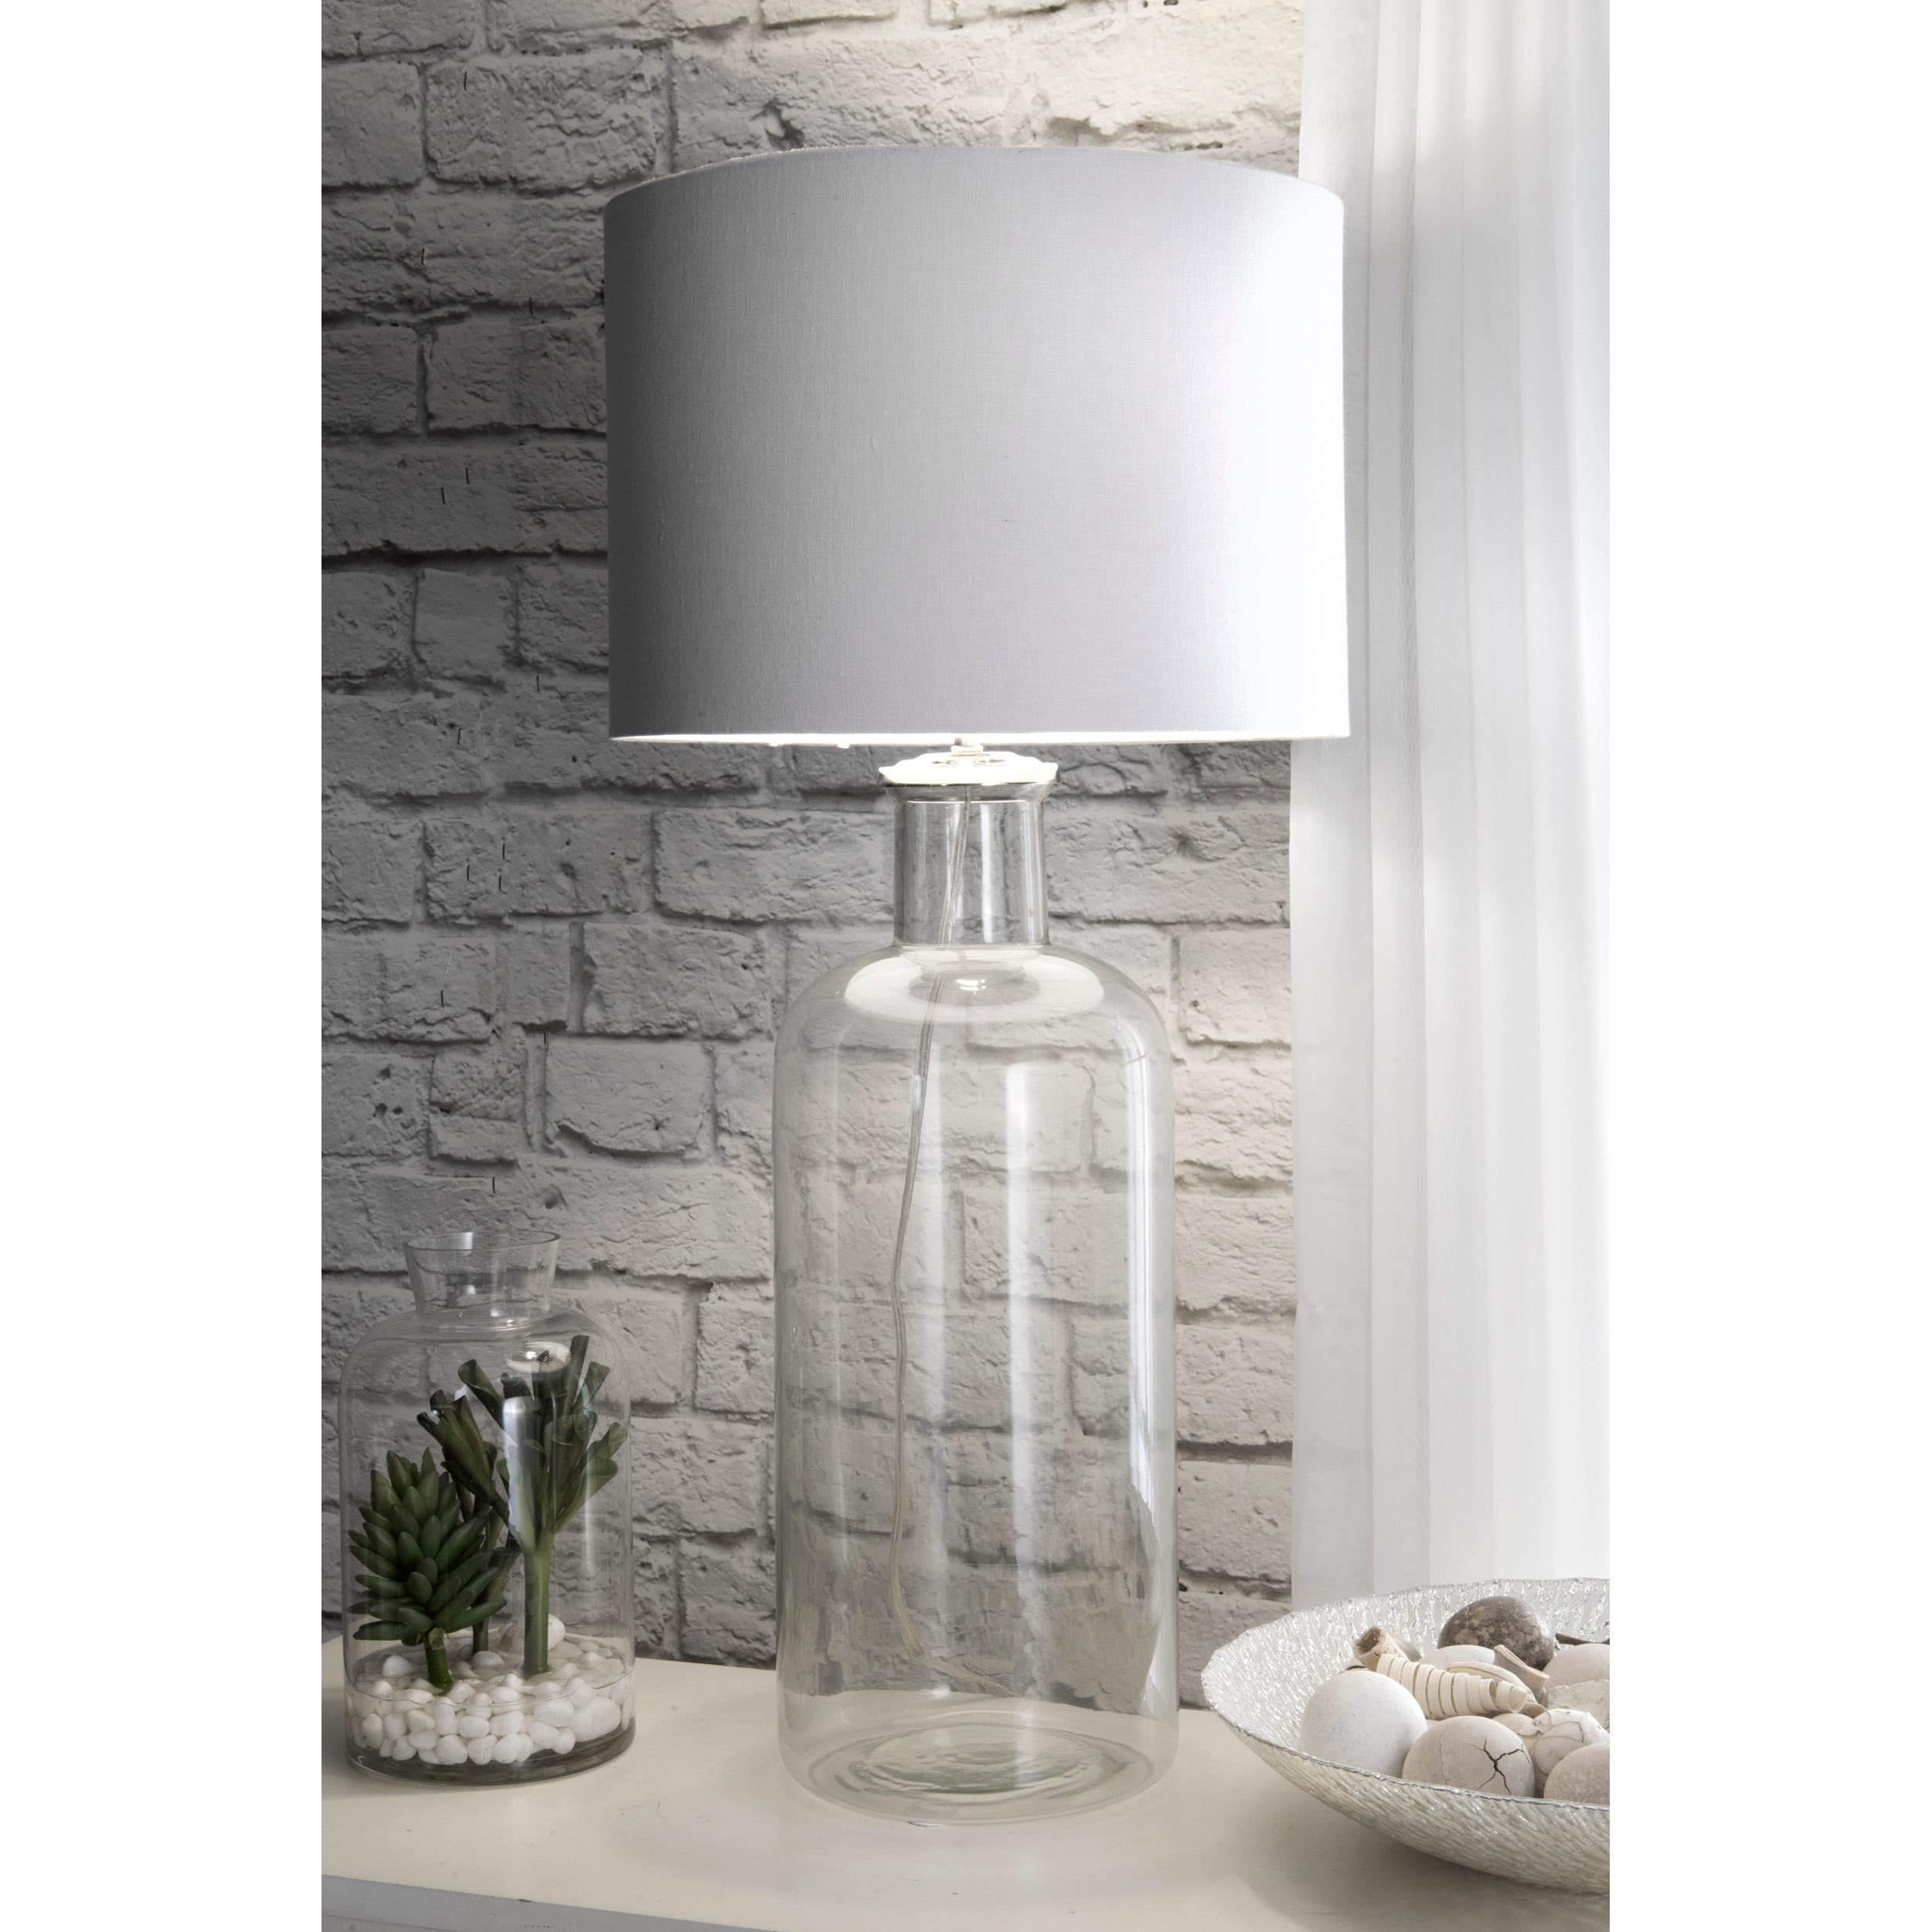 Nuloom Emma Clear Glass Table Lamp With, Gold 24 Inch Emma Clear Glass Table Lamp